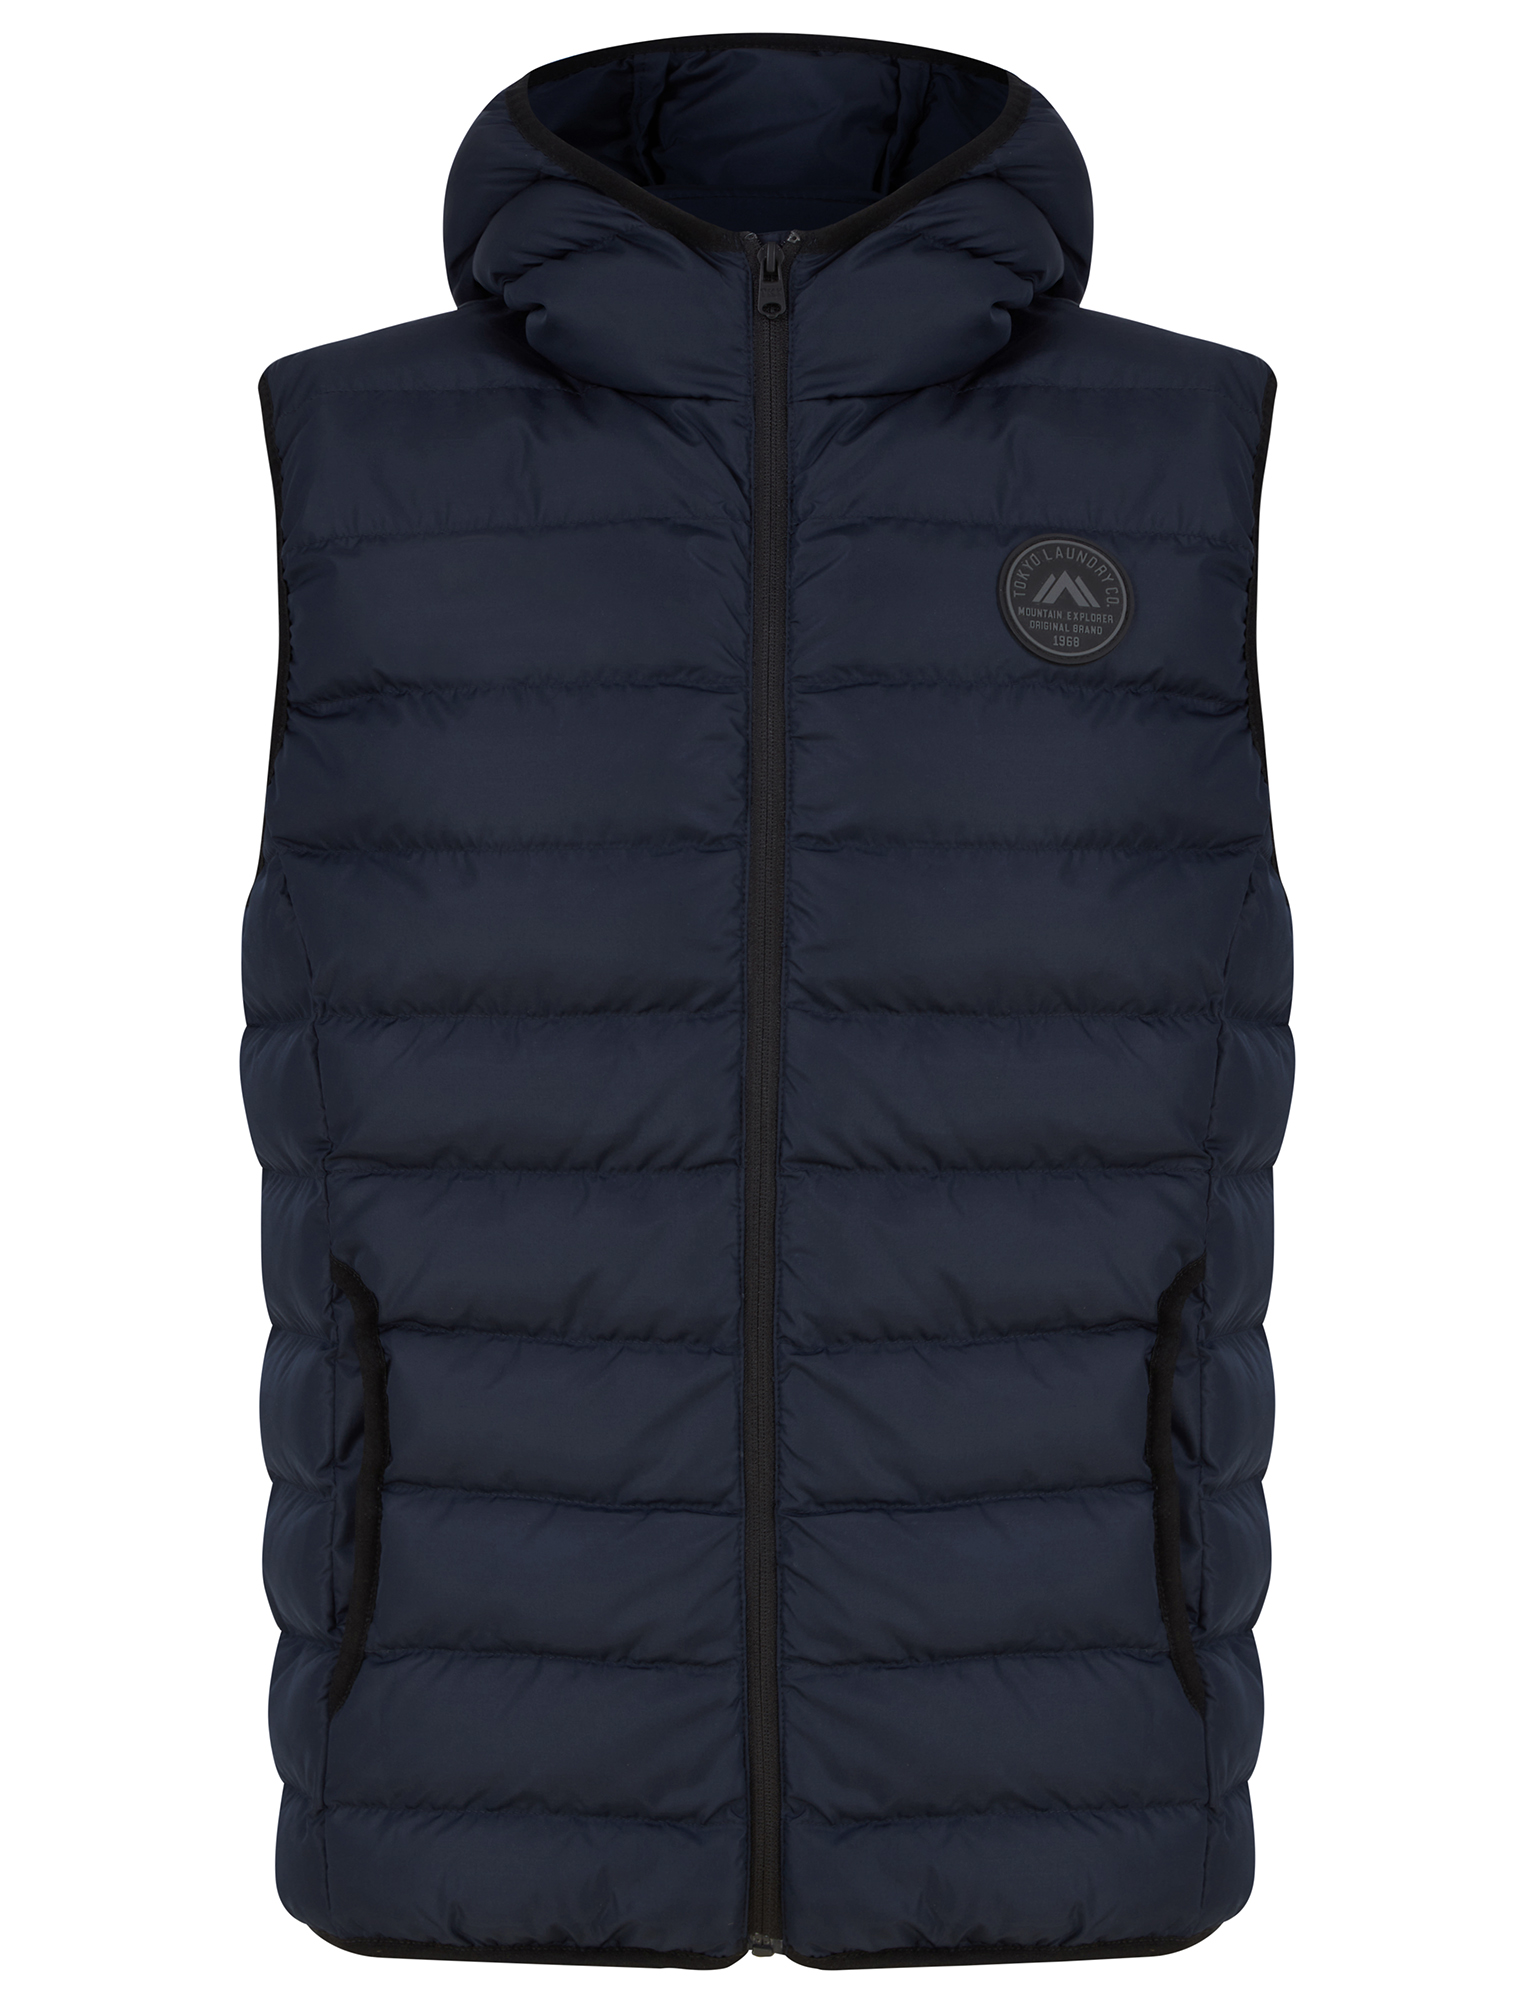 Tokyo Laundry Men's Gilet Hooded Quilted Puffer Body Warmer Padded ...